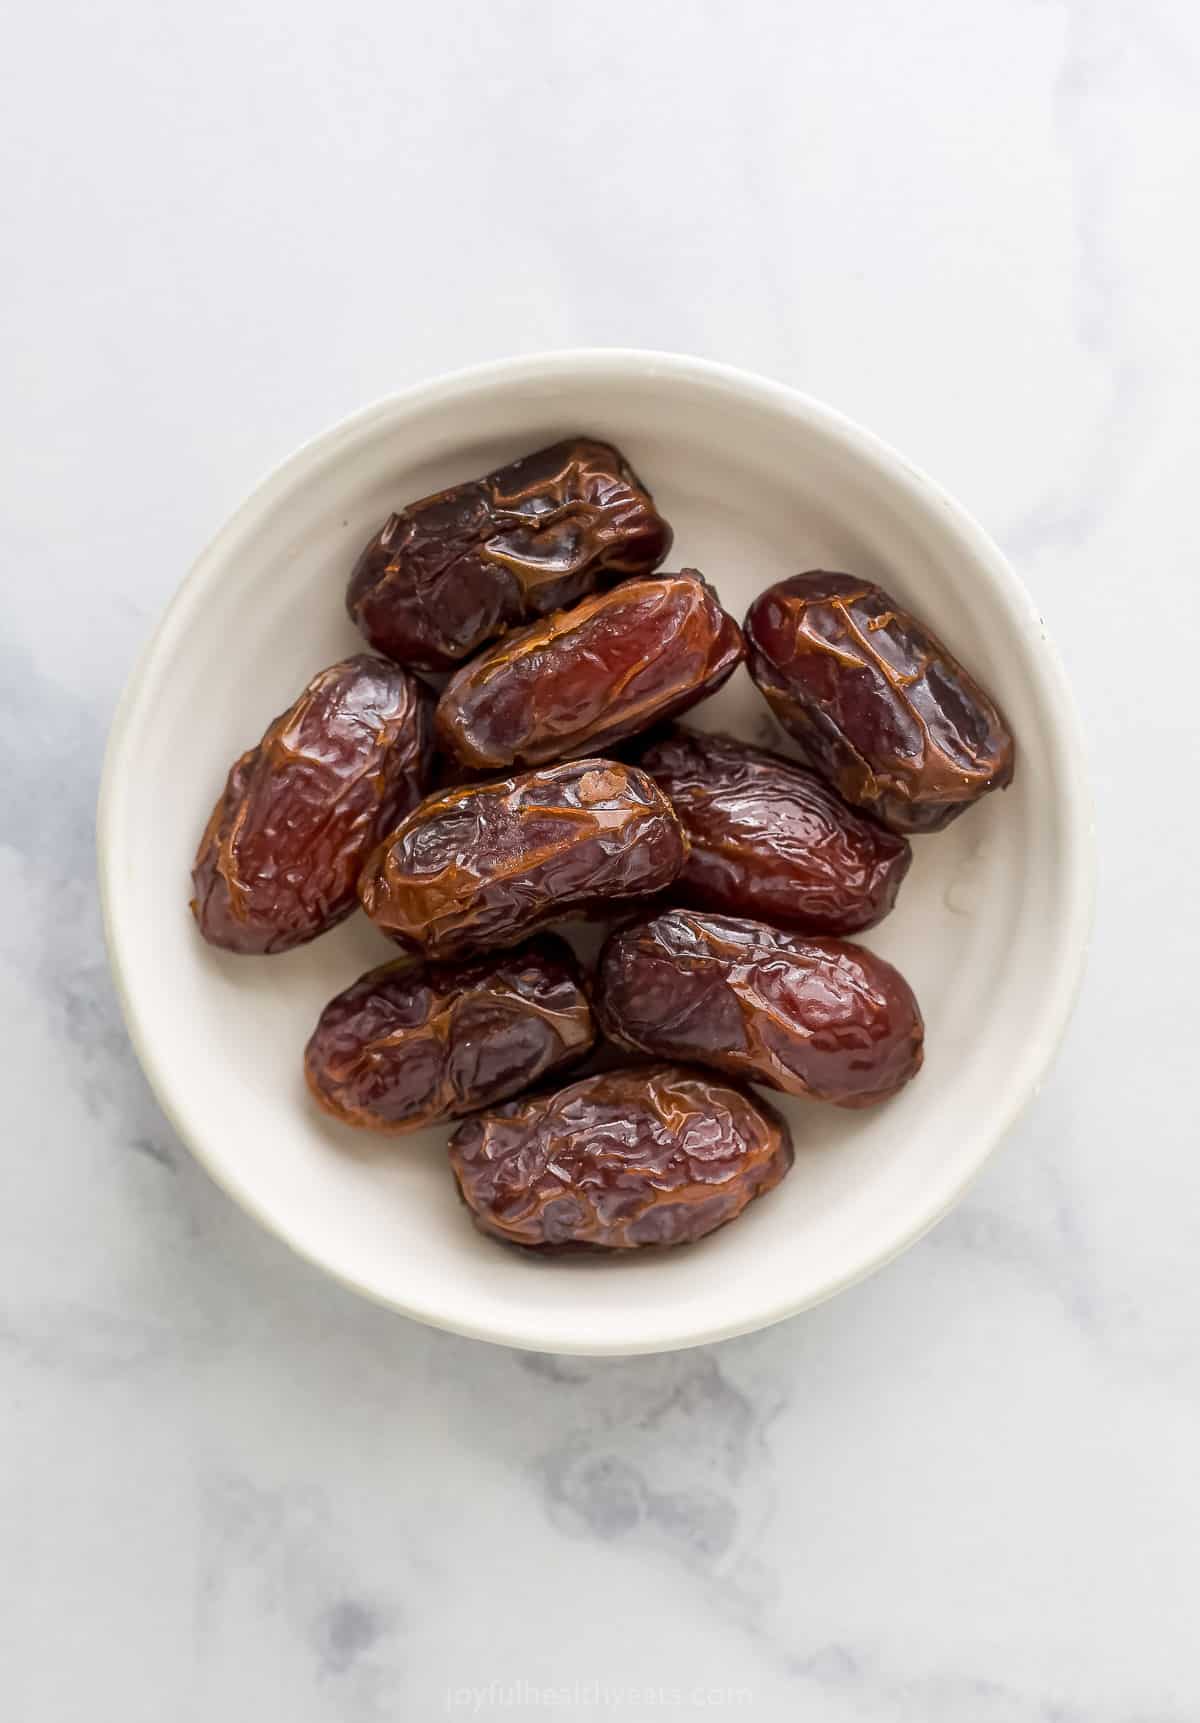 A small white dish holding nine whole dates